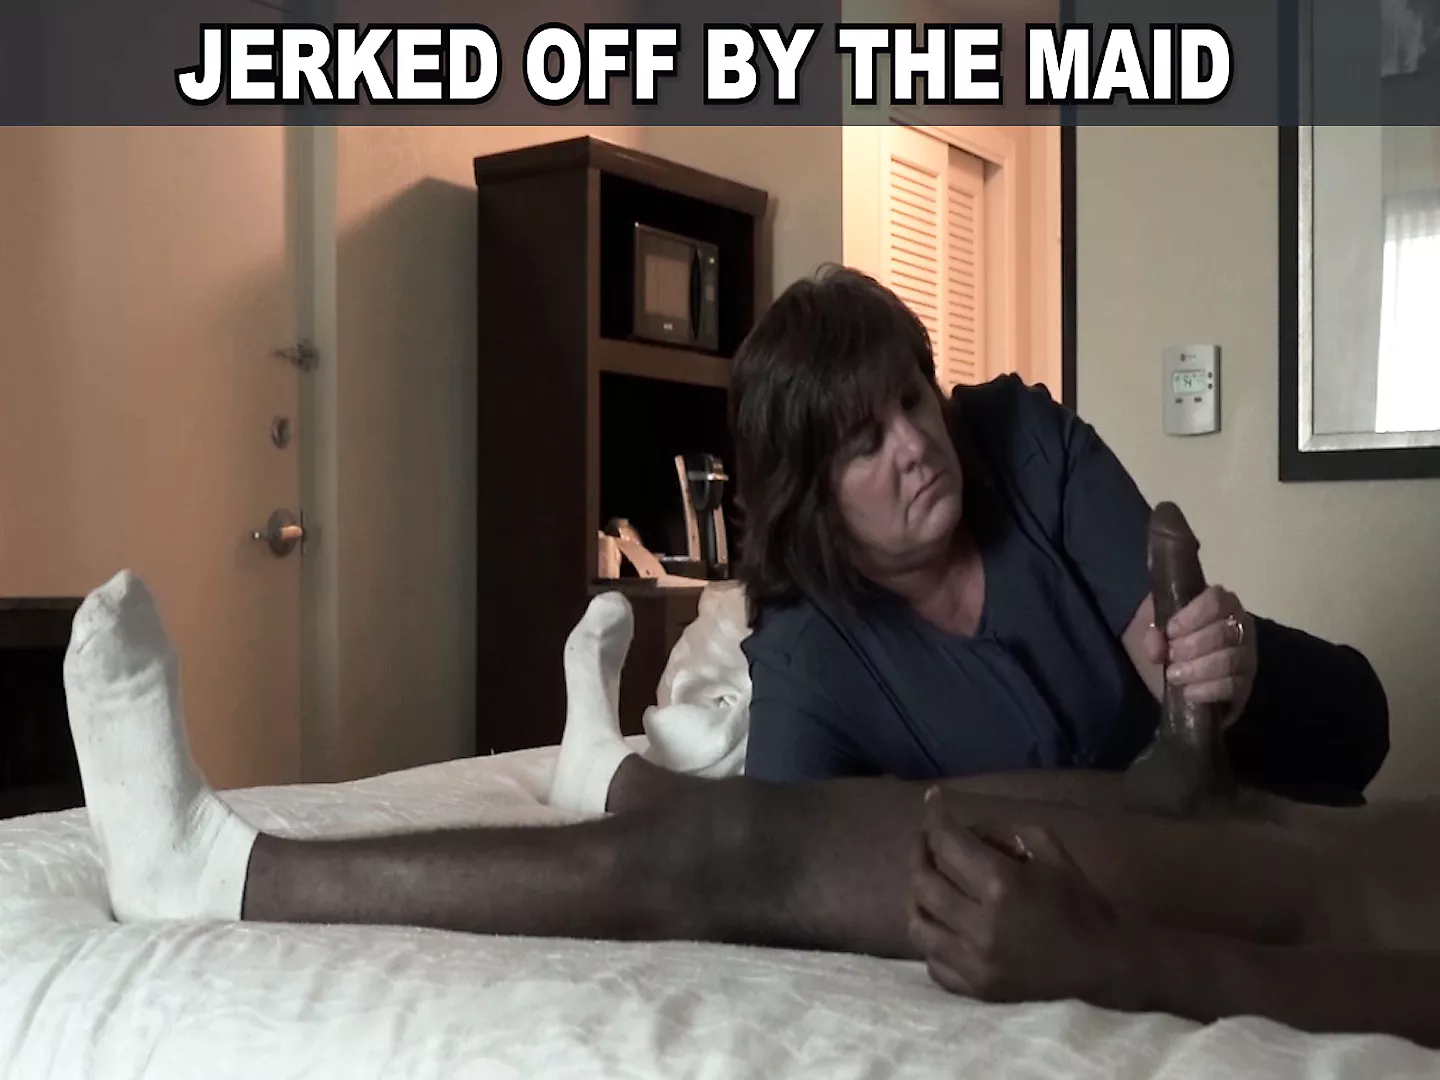 BBW Hotel Maid Strokes Big Black Cock With Her Soft White Hands pic